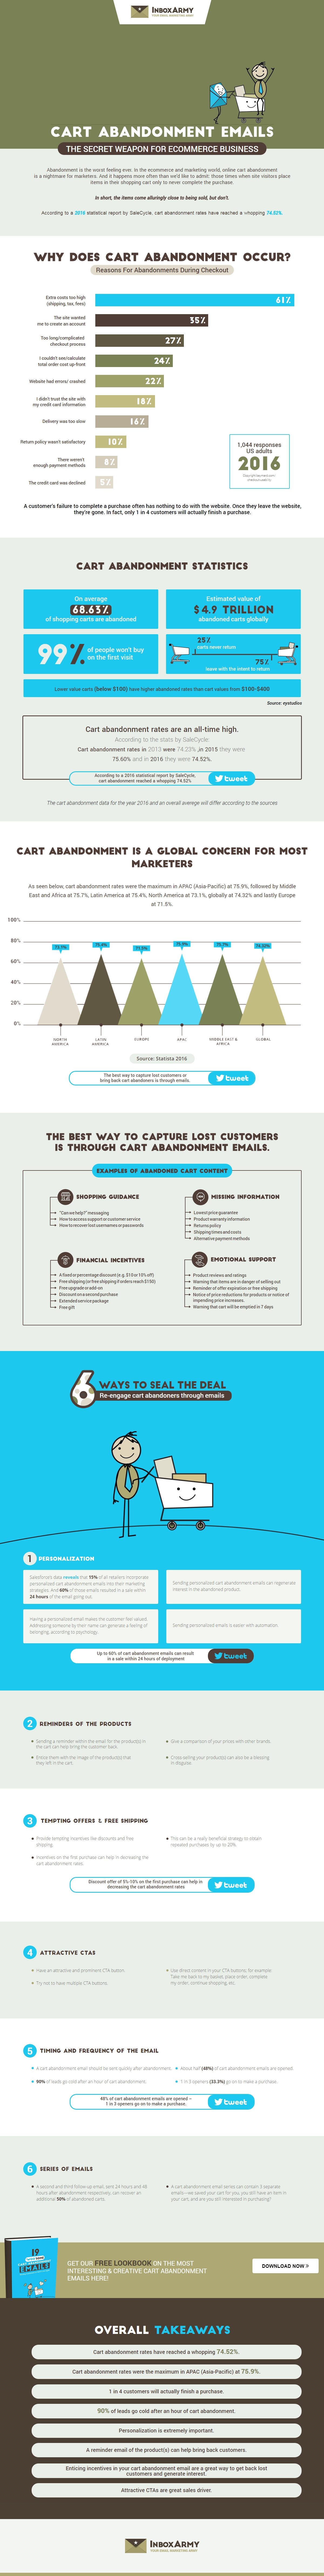 7 Email Marketing Tips to End the Nightmare of Cart Abandonment [Infographic]